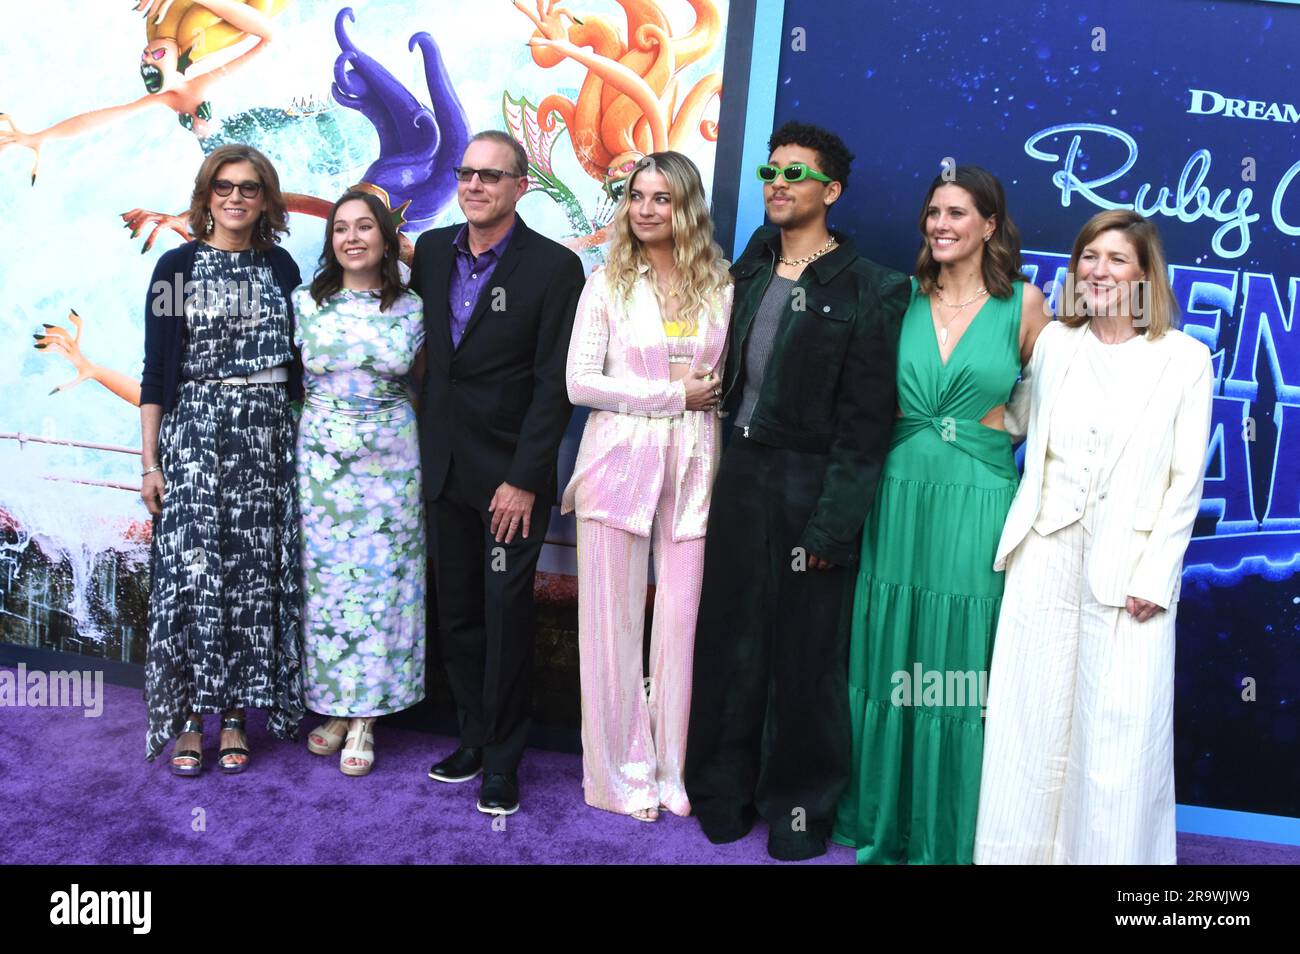 Los Angeles, California. 28th June 2023 (L-R) President of Dreamworks Margie Cohn. Co-Director Faryn Pearl, Director Kirk DeMicco, Actress Annie Murphy, Actor Jaboukie Young-White, Producer Kelly Cooney Ciella, and Kristin Lowe attend Universal Pictures Ruby Gillman: Teenage Kraken Premiere at TCL Chinese Theatre on June 28, 2023 in Los Angeles, California, USA. Photo by Barry King/Alamy Live News Stock Photo